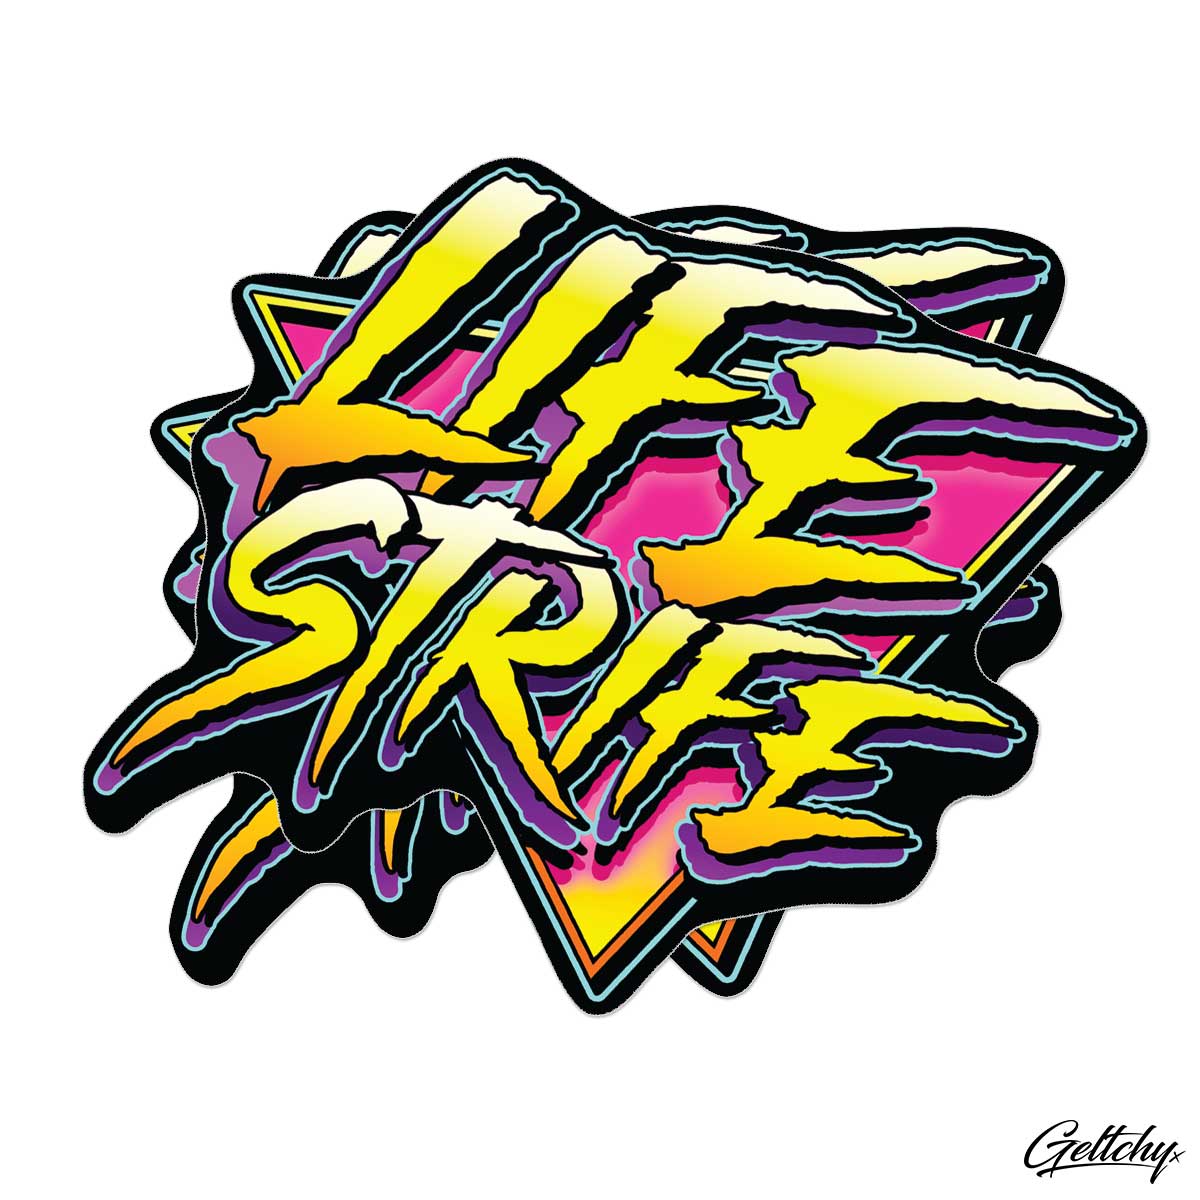 LIFE STRIFE Geometric Logo Sticker  Immerse yourself in the nostalgic 80s vibe with these eye-catching decals